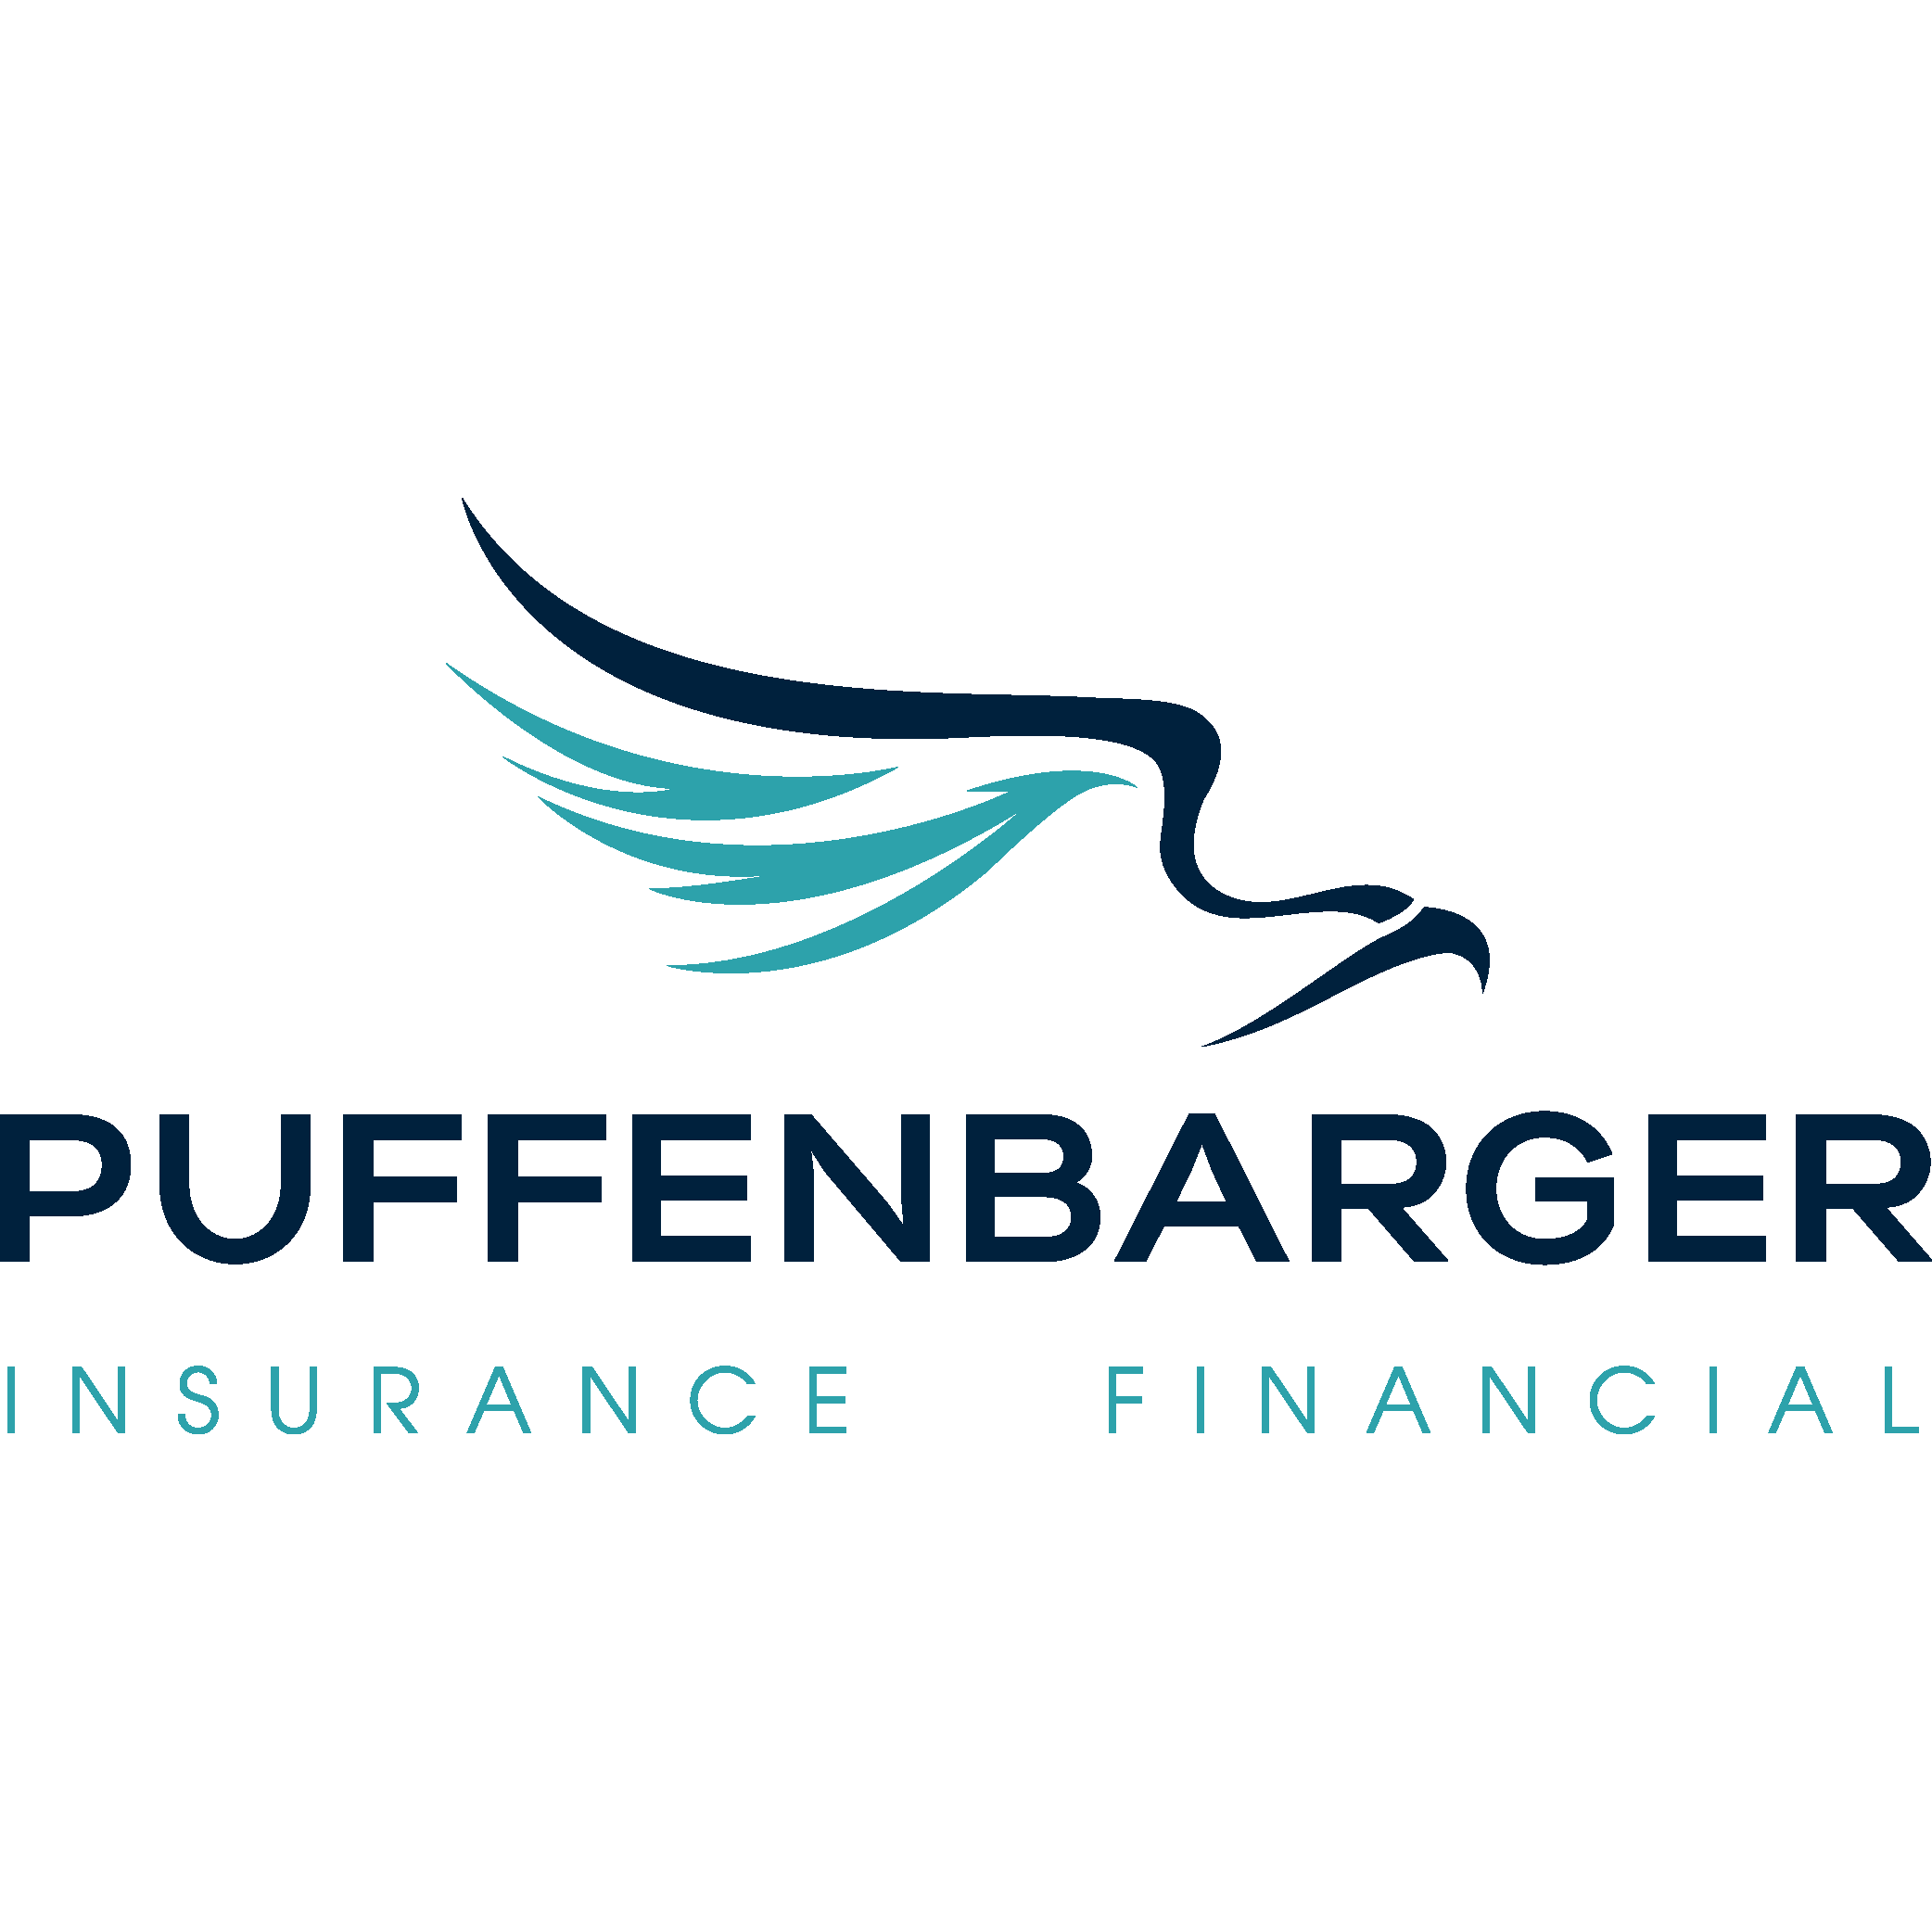 Keith W Puffenbarger, Insurance Agent